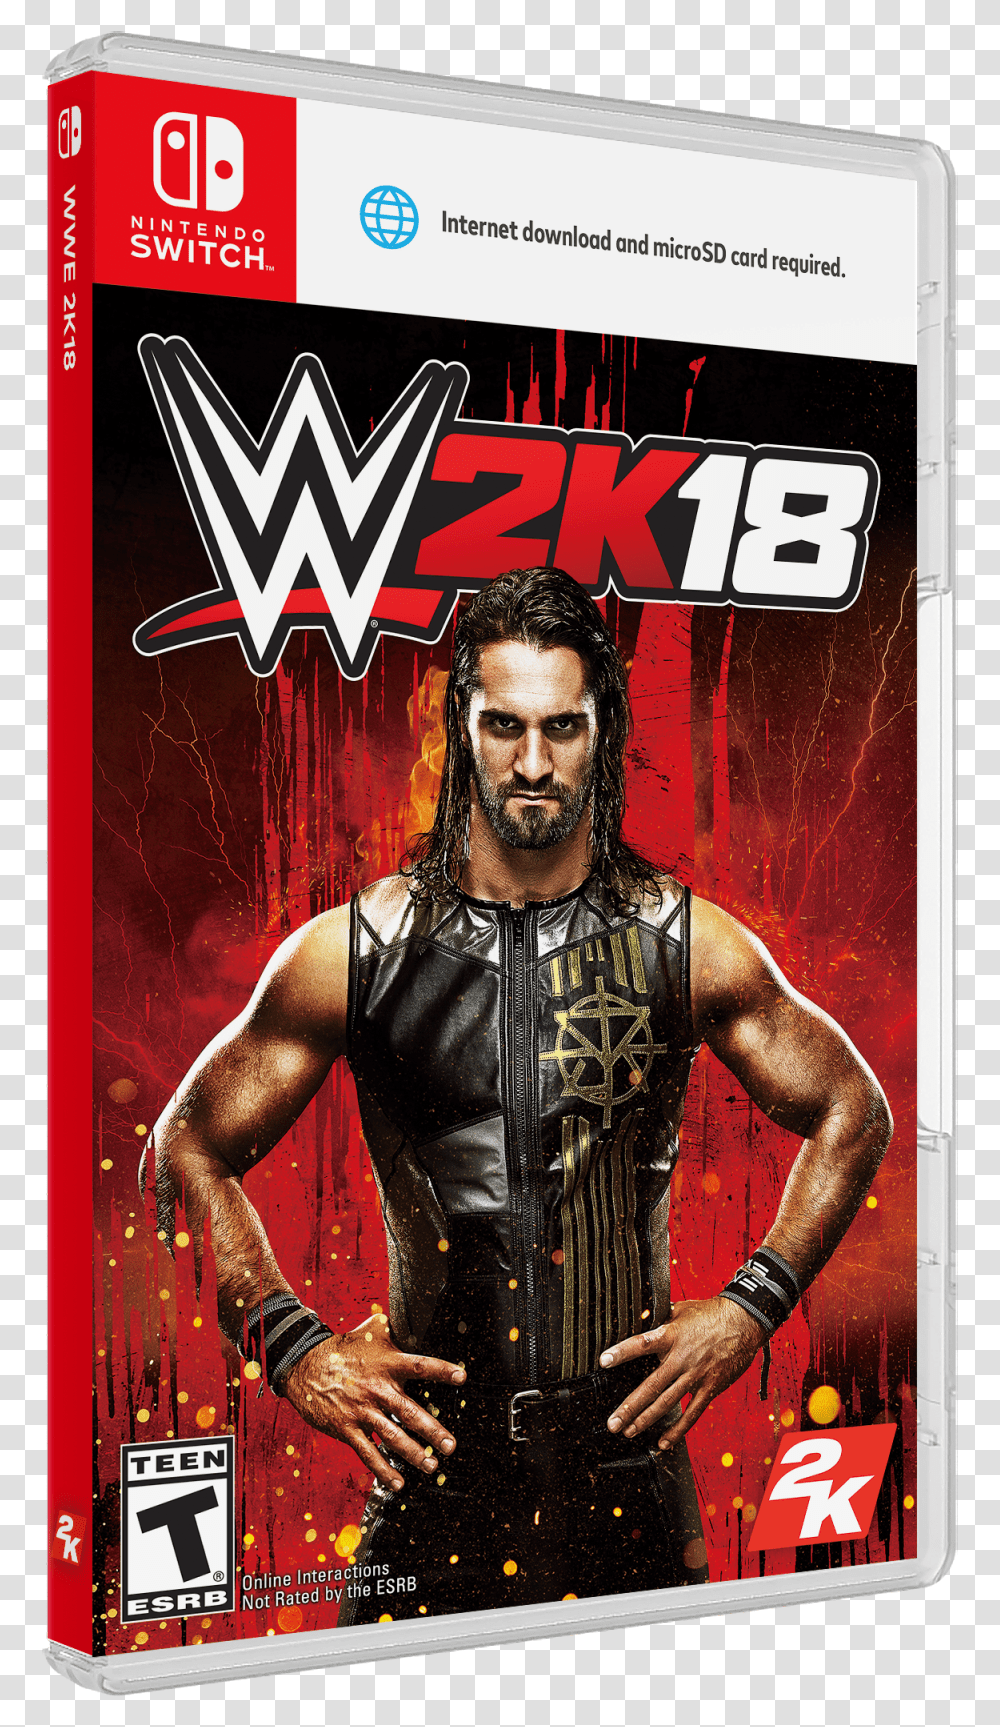 Image 2k18 Wwe Nintendo Switch, Person, Human, Advertisement, Poster Transparent Png